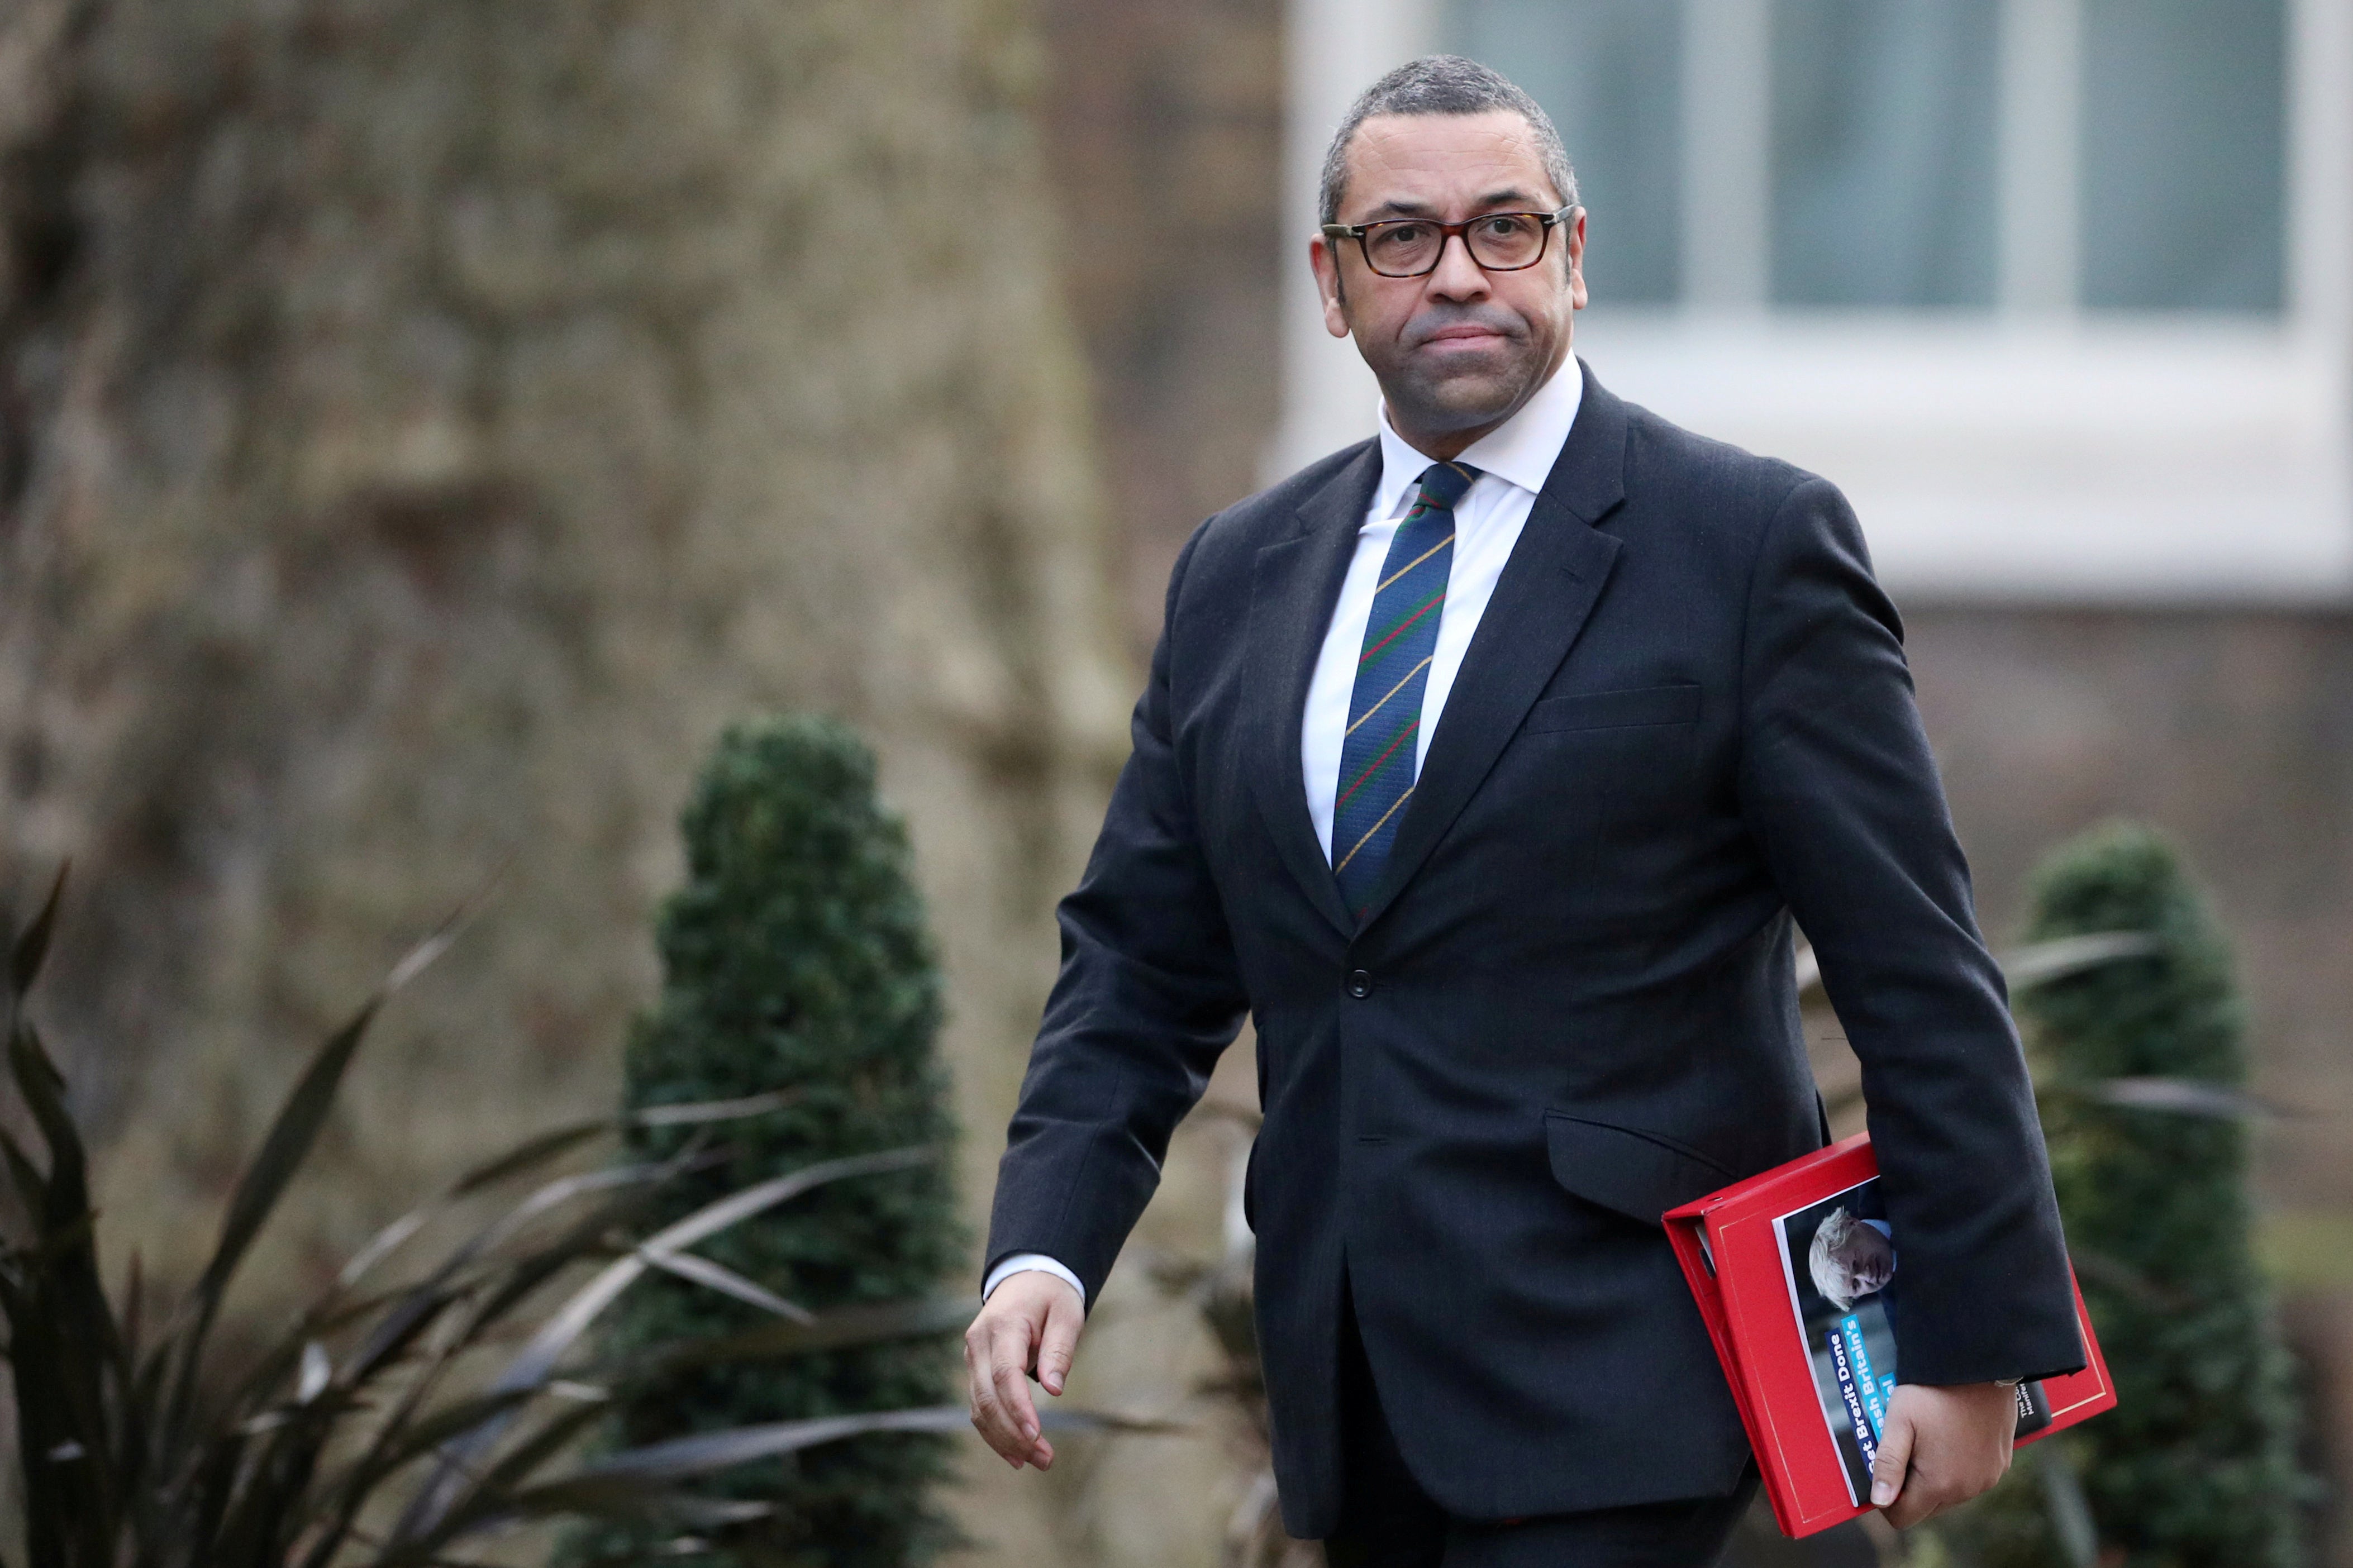 Foreign office minister James Cleverly suggested the government had no plans for further action